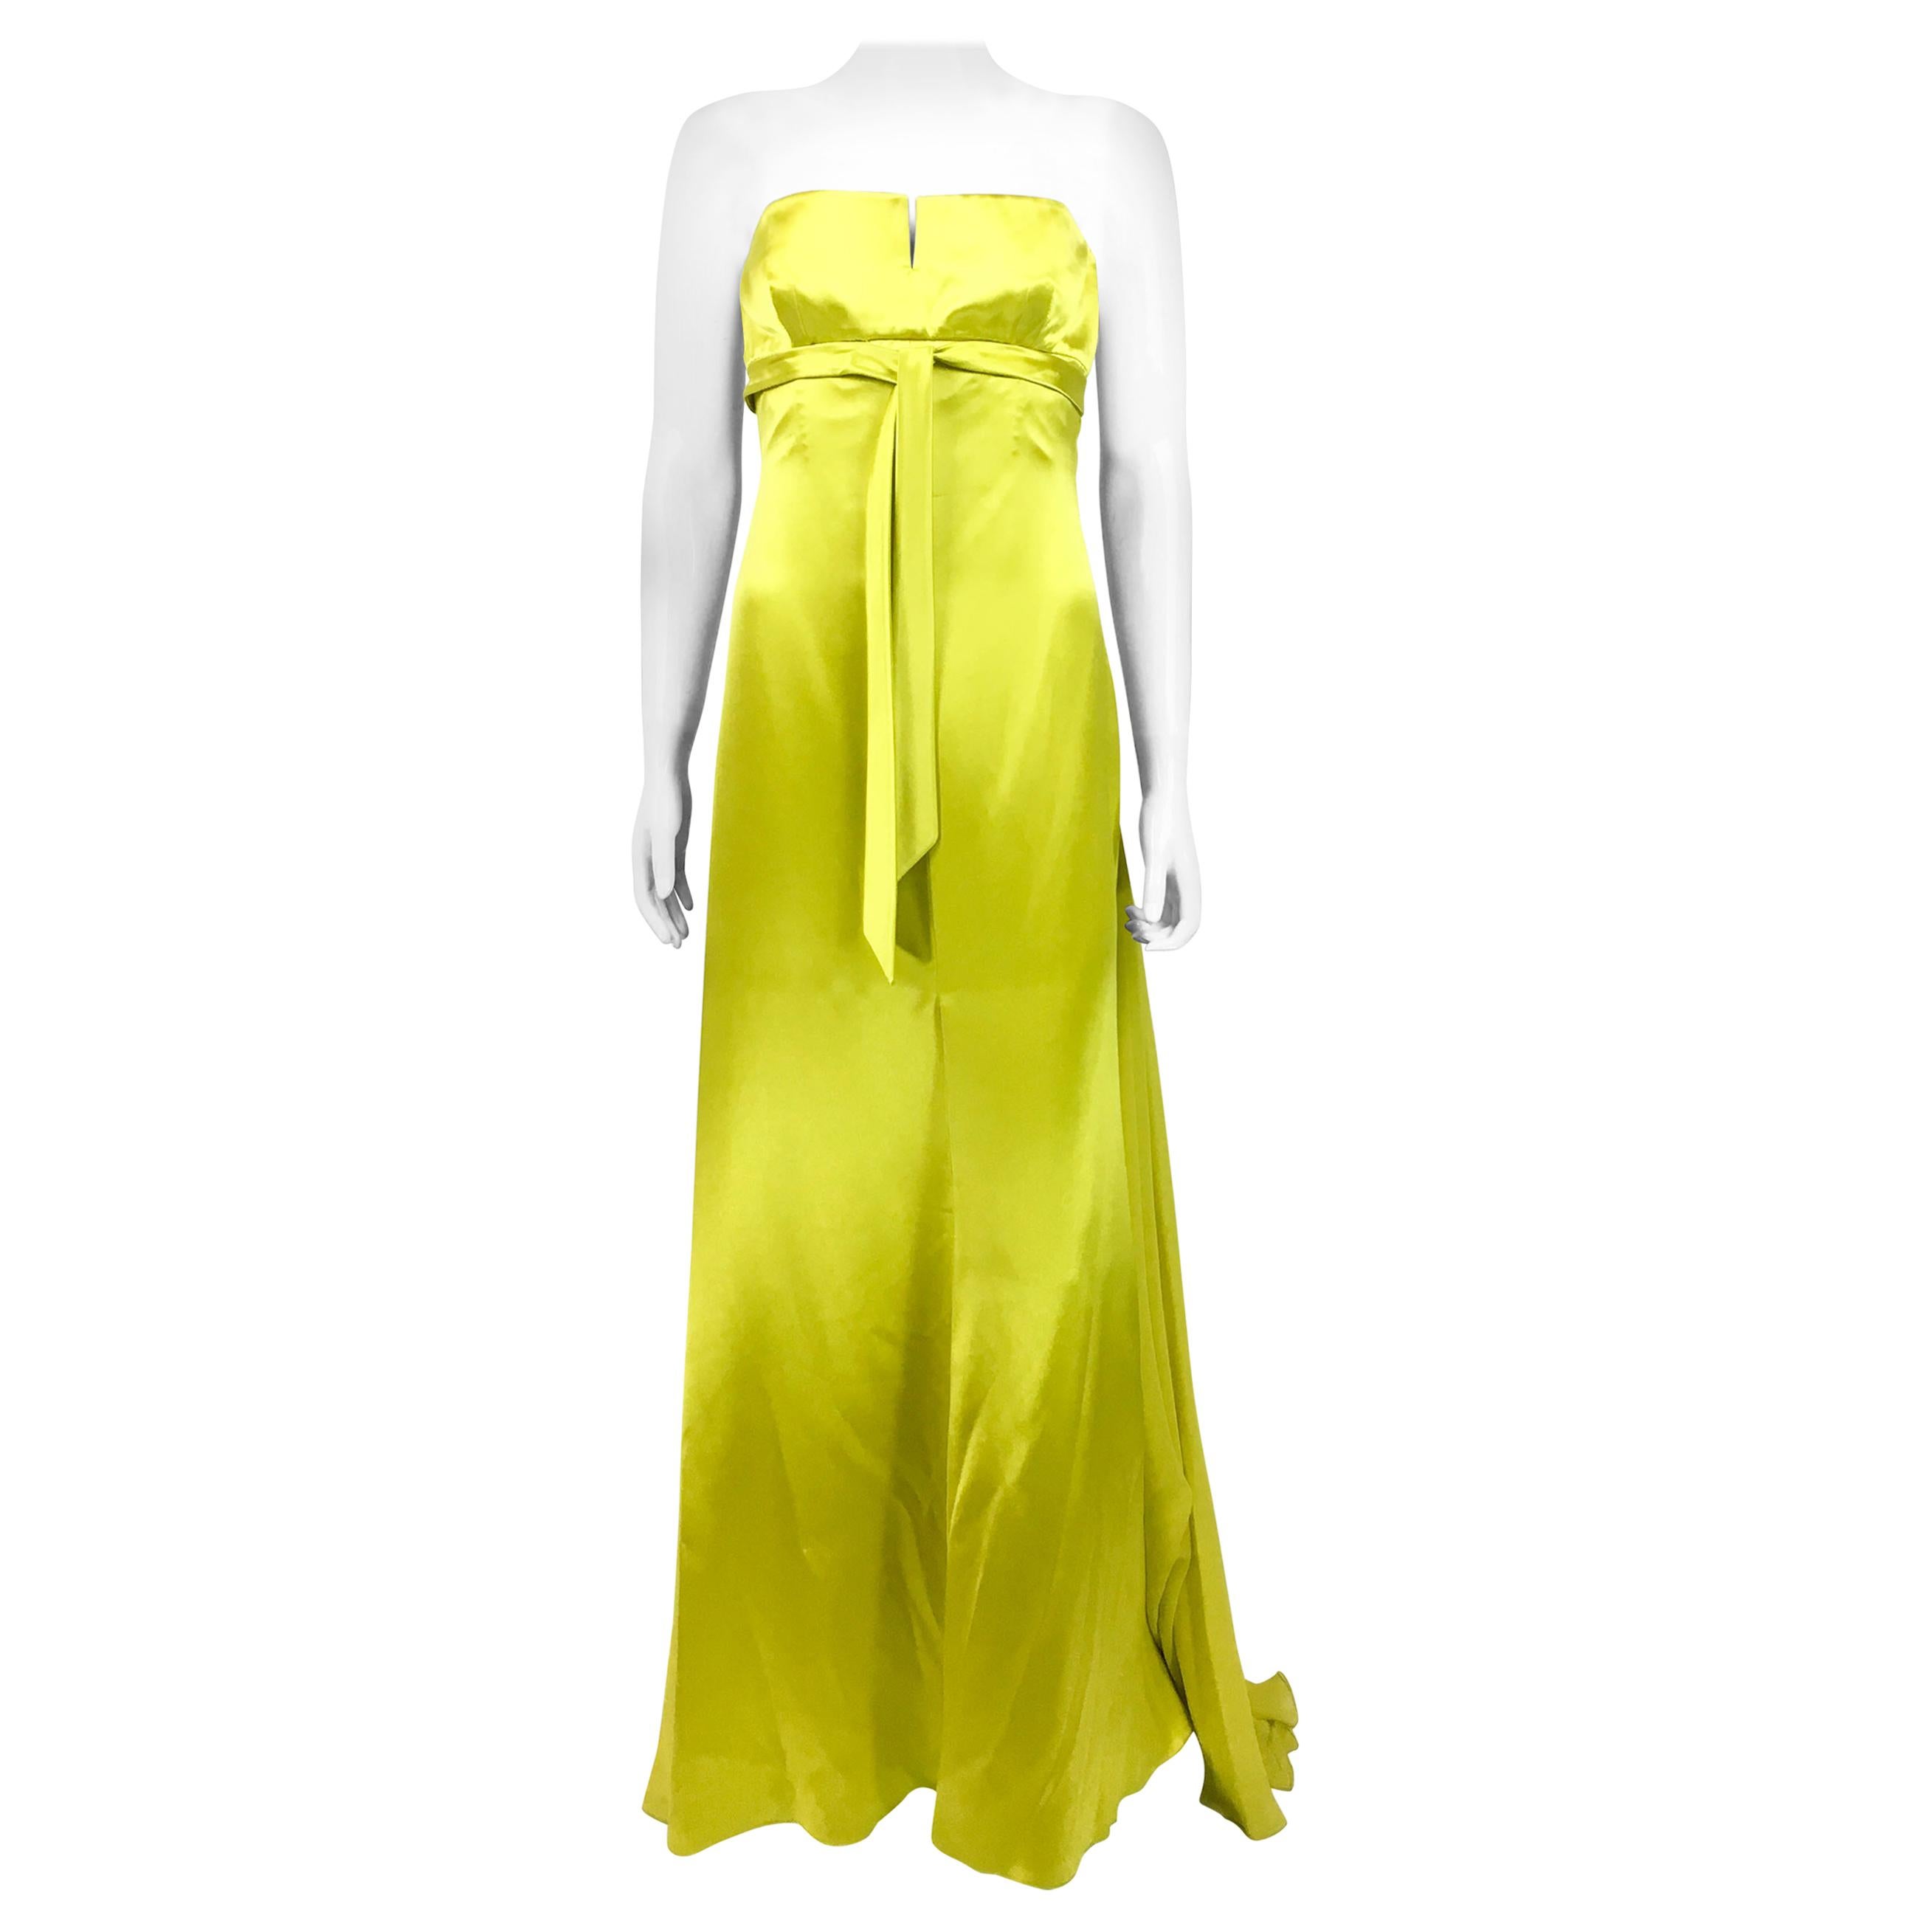 Vintage Valentino Chartreuse Silk Evening Gown. This fabulous strapless gown by Valentino dates back from the 1990’s. With a bustier design and empire waist (high waist), it has boning structure to accentuate the waist. The front of the dress is